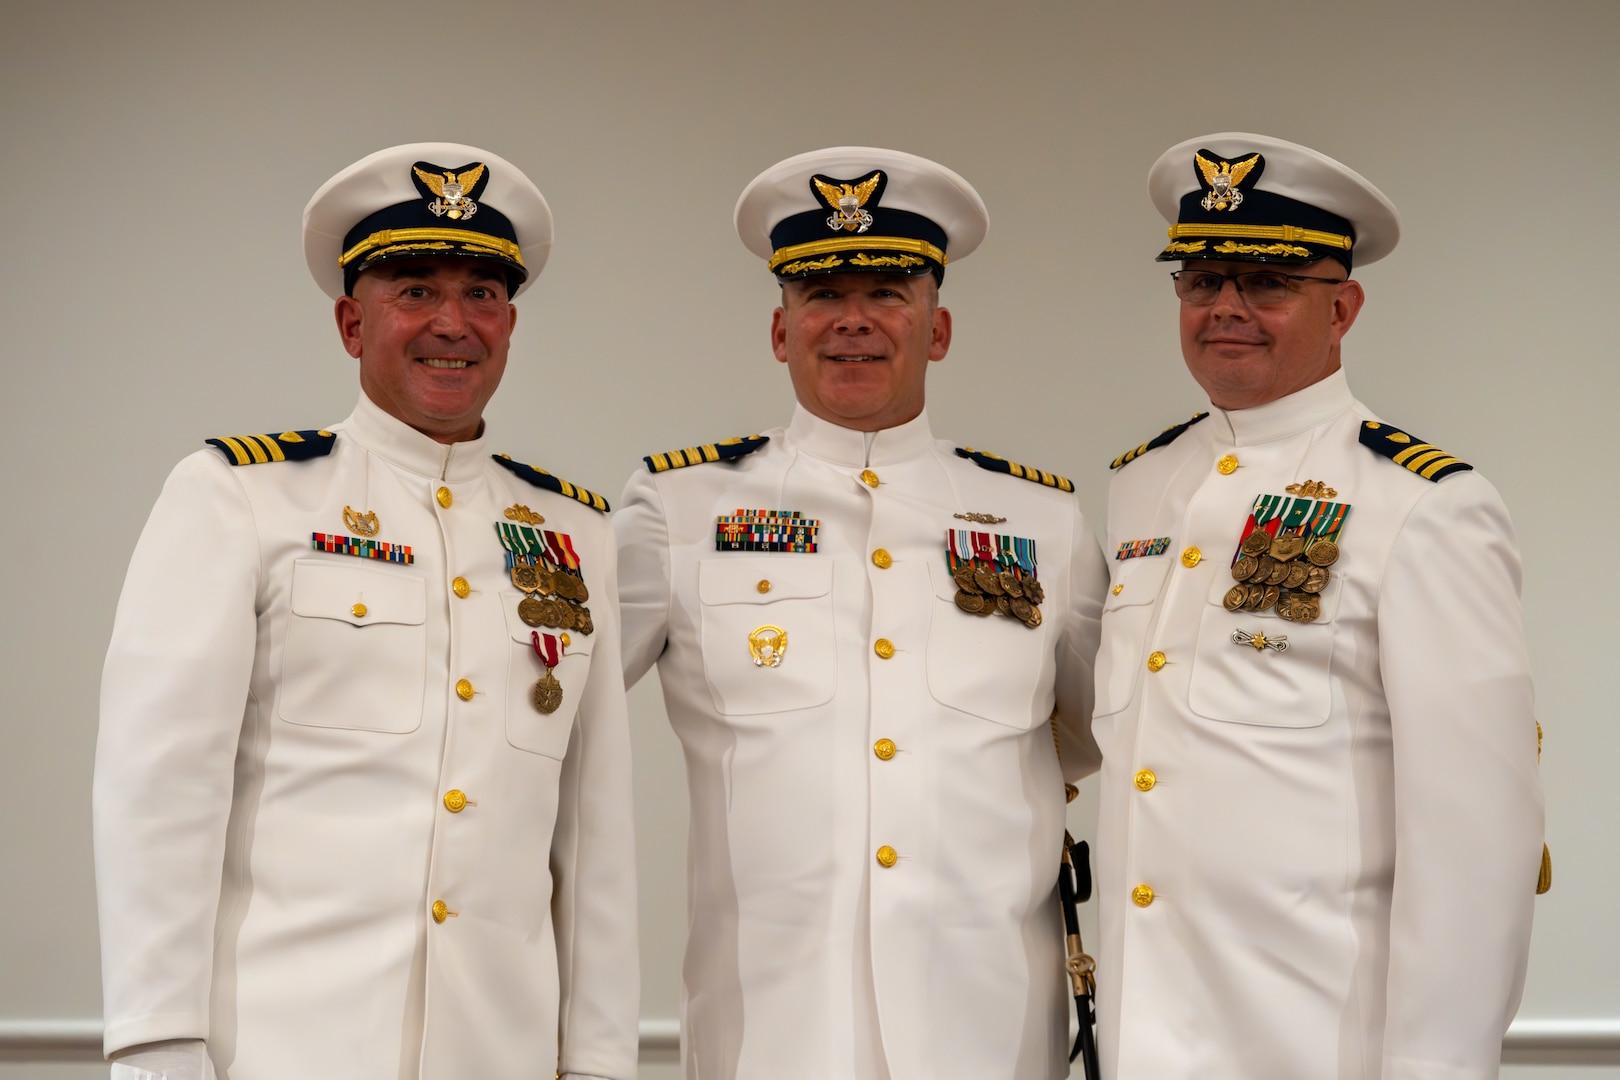 Cmdr. Lovenstein( left), Capt. Ryan and Cmdr. John Elkins pose for a photo following Port Security 305’s change of command ceremony in Newport News, Virginia, June 27, 2023. Cmdr. Elkins relieved Cmdr. Lovenstein as the commanding officer of PSU 305, Capt. Jason Ryan, chief of Pacific Area operations, presided over the ceremony. U.S. Coast Guard courtesy photo.